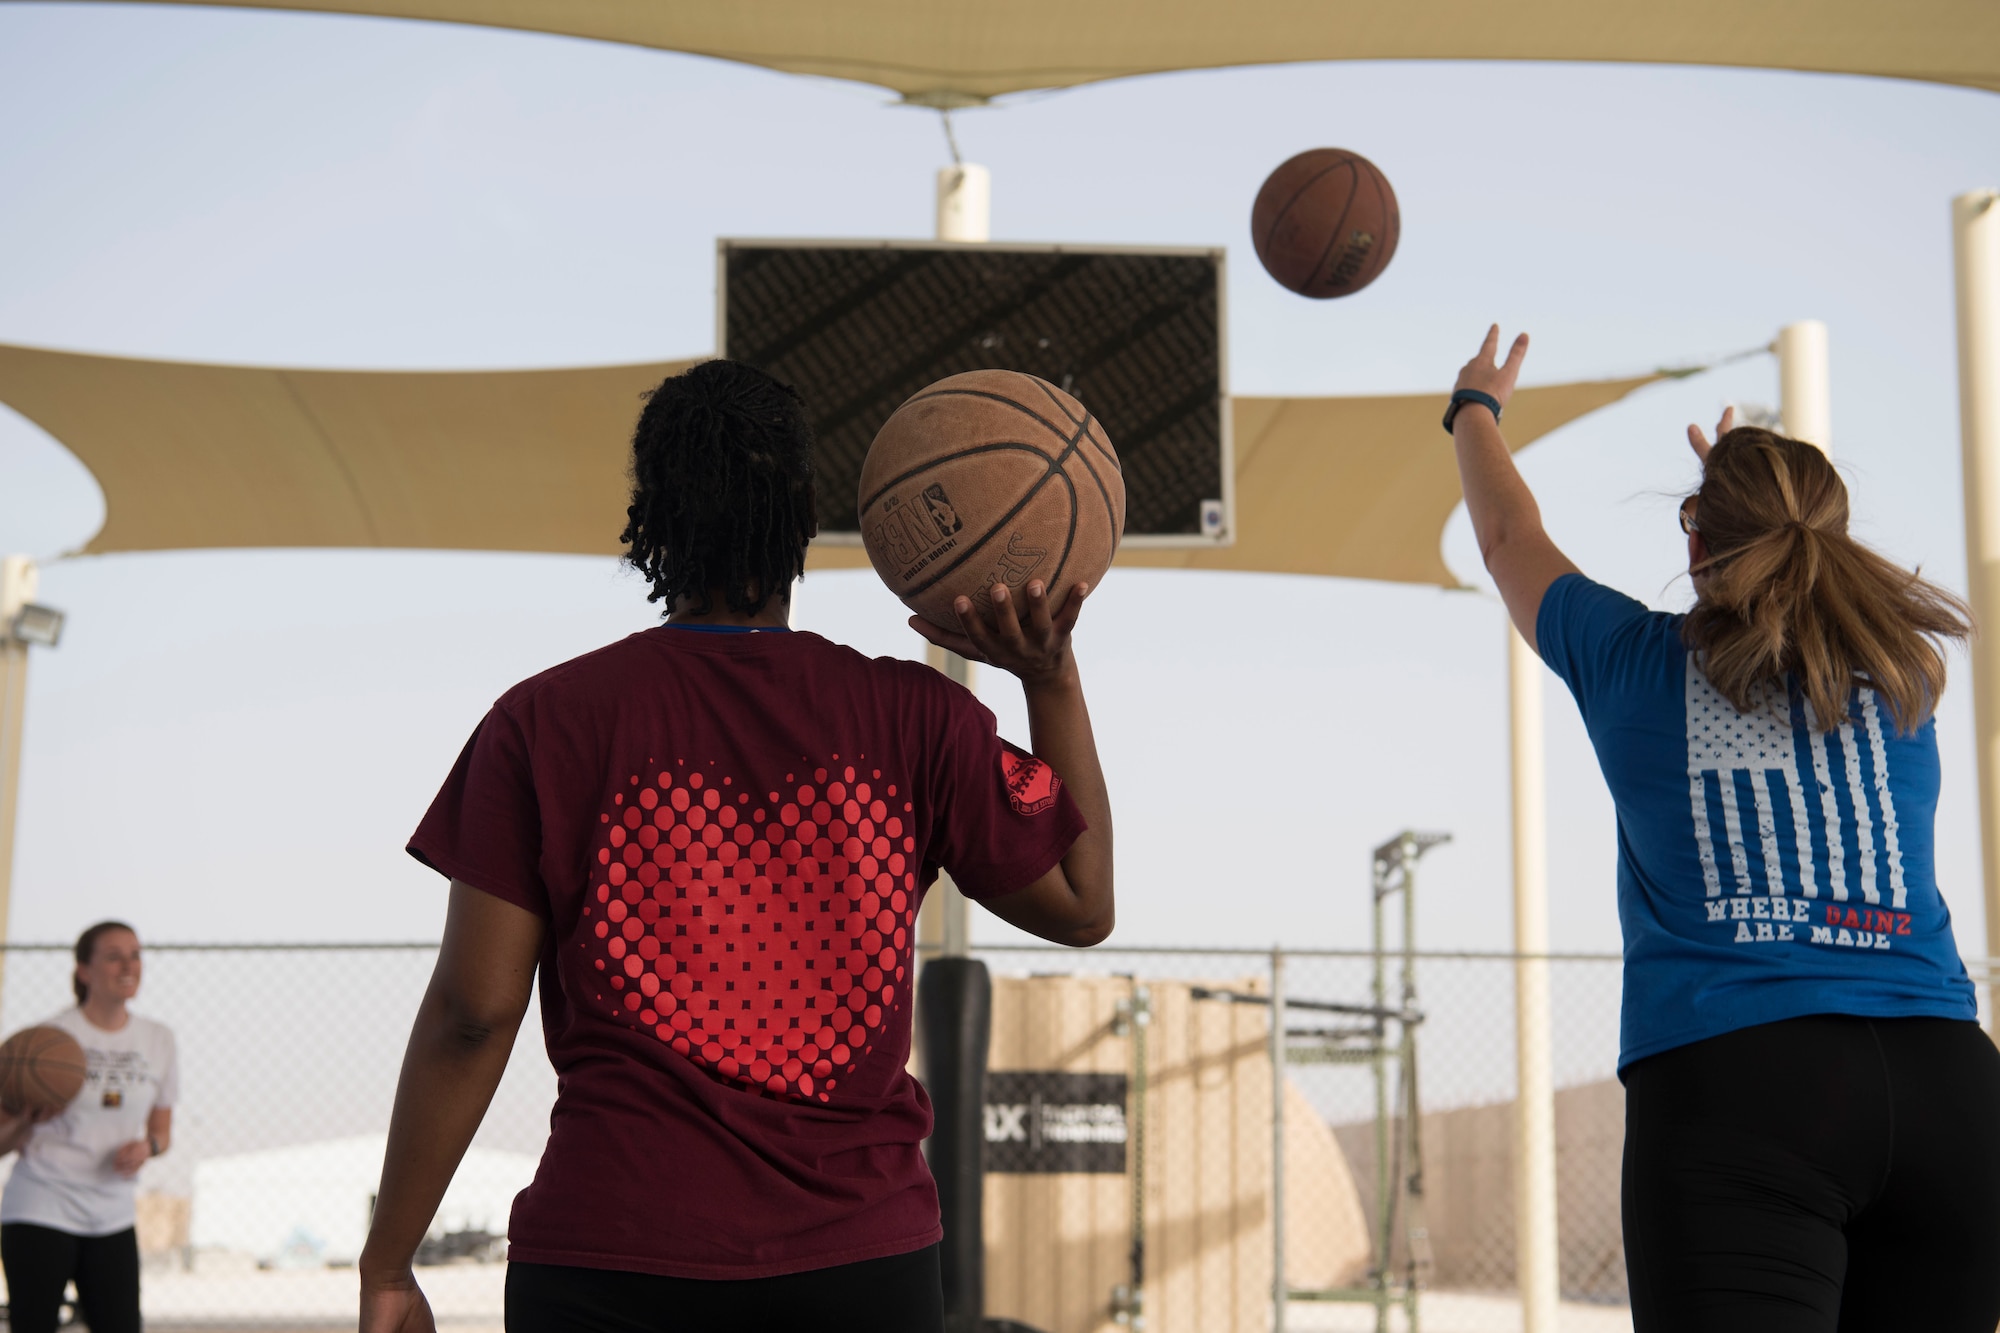 Airmen with the 332nd Air Expeditionary Wing attempt to throw a 3-pointer during the Commander’s Challenge at an undisclosed location in Southwest Asia May 4, 2018.